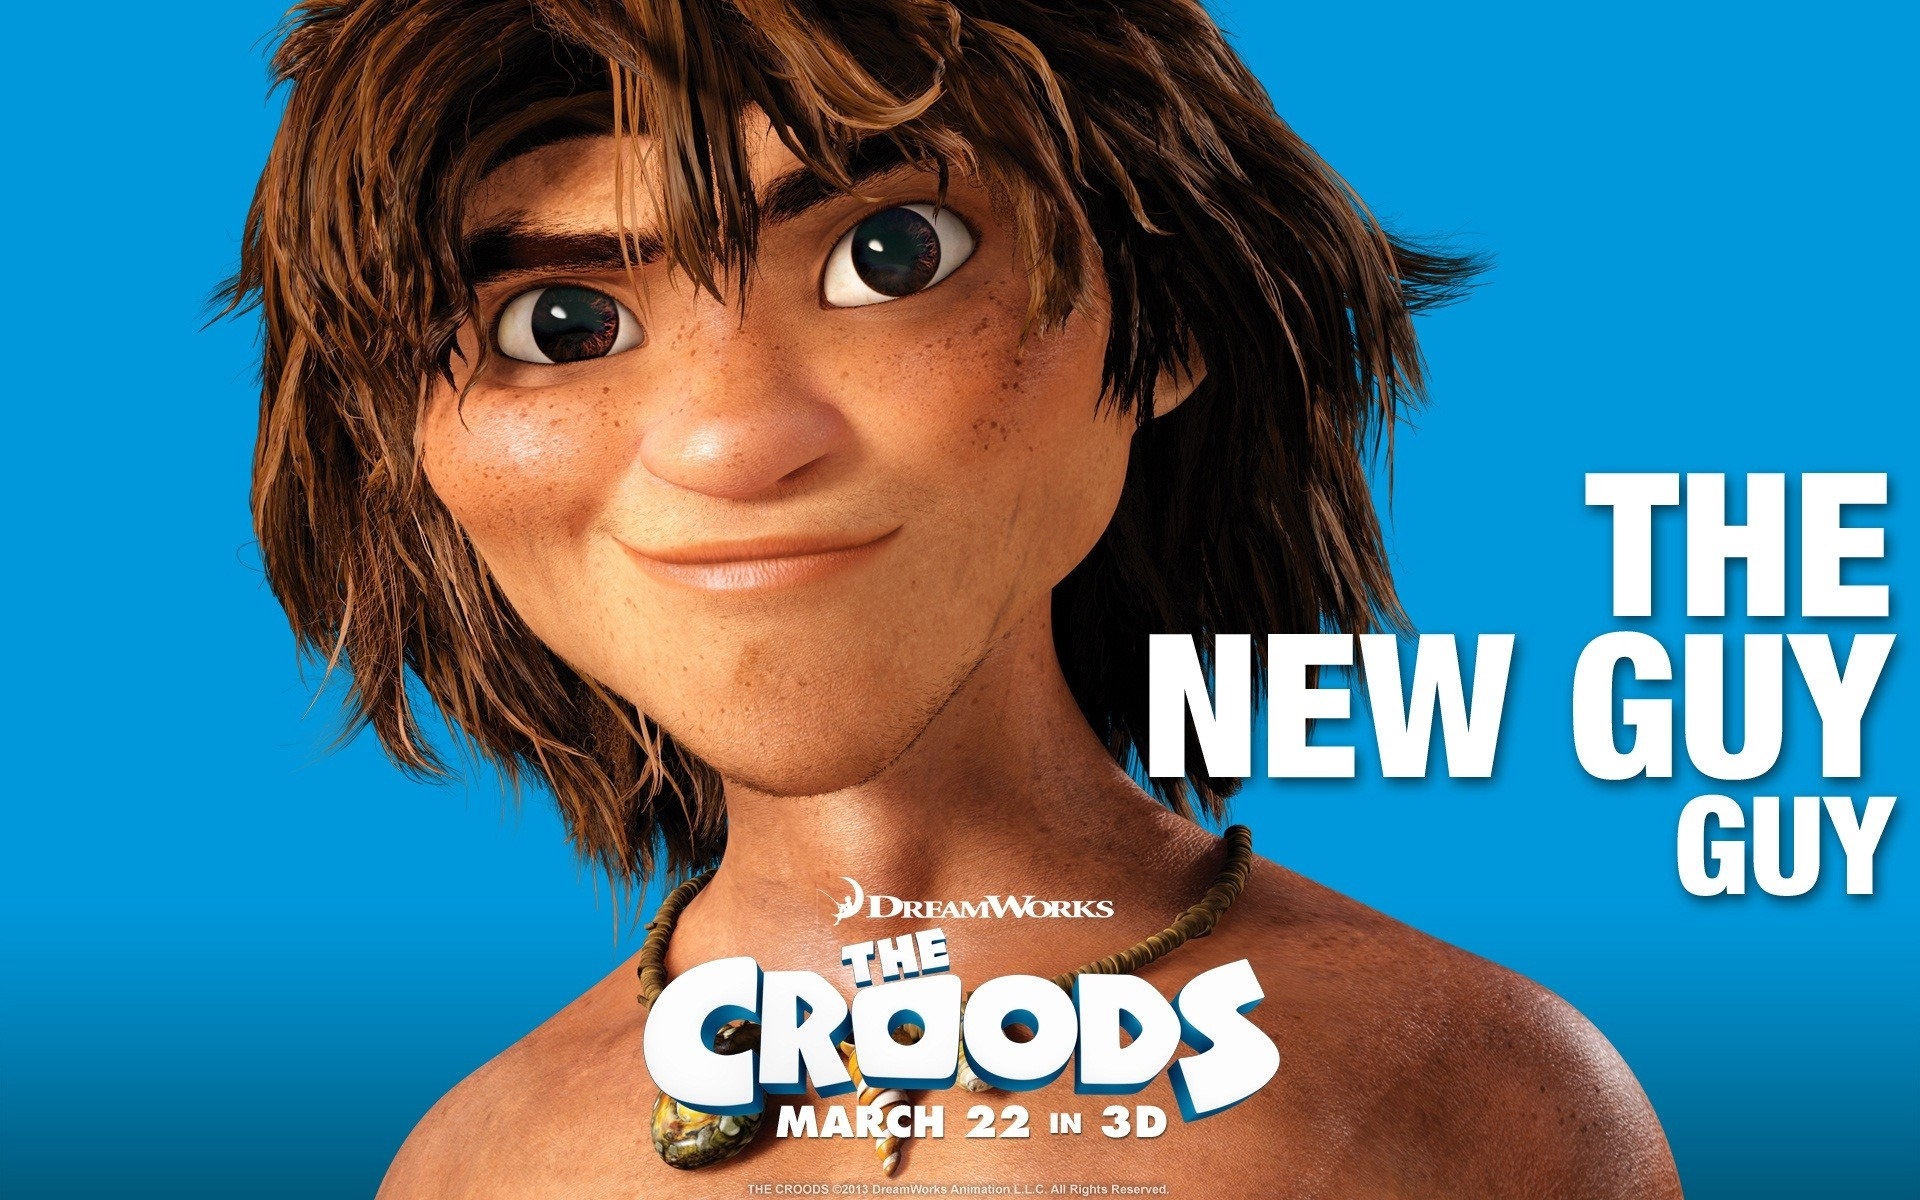 The Croods HD movie wallpapers #8 - 1920x1200